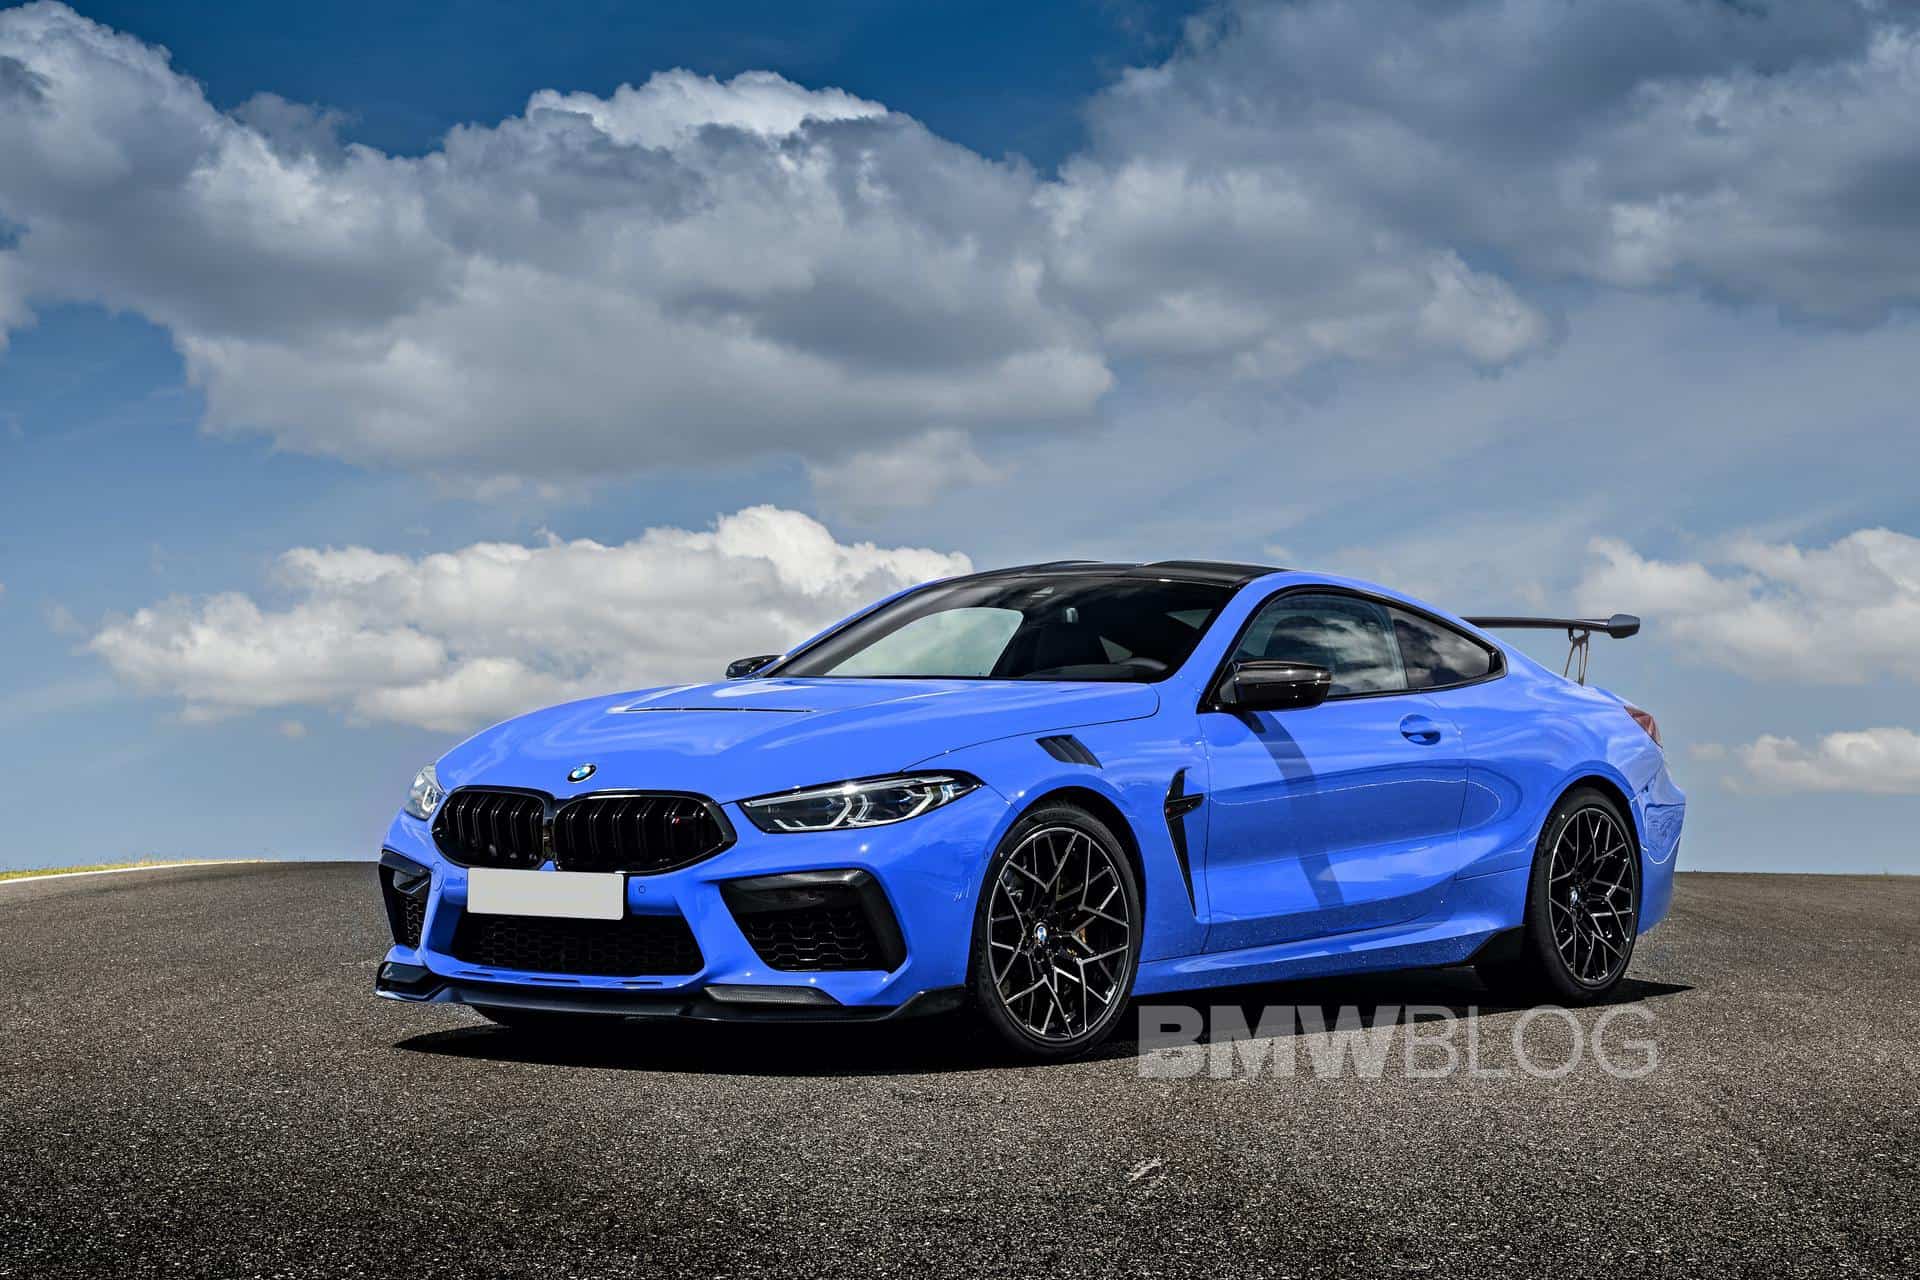 bmw m8 csl 2022 - Is this the BMW M8 CSL going around the racetrack?